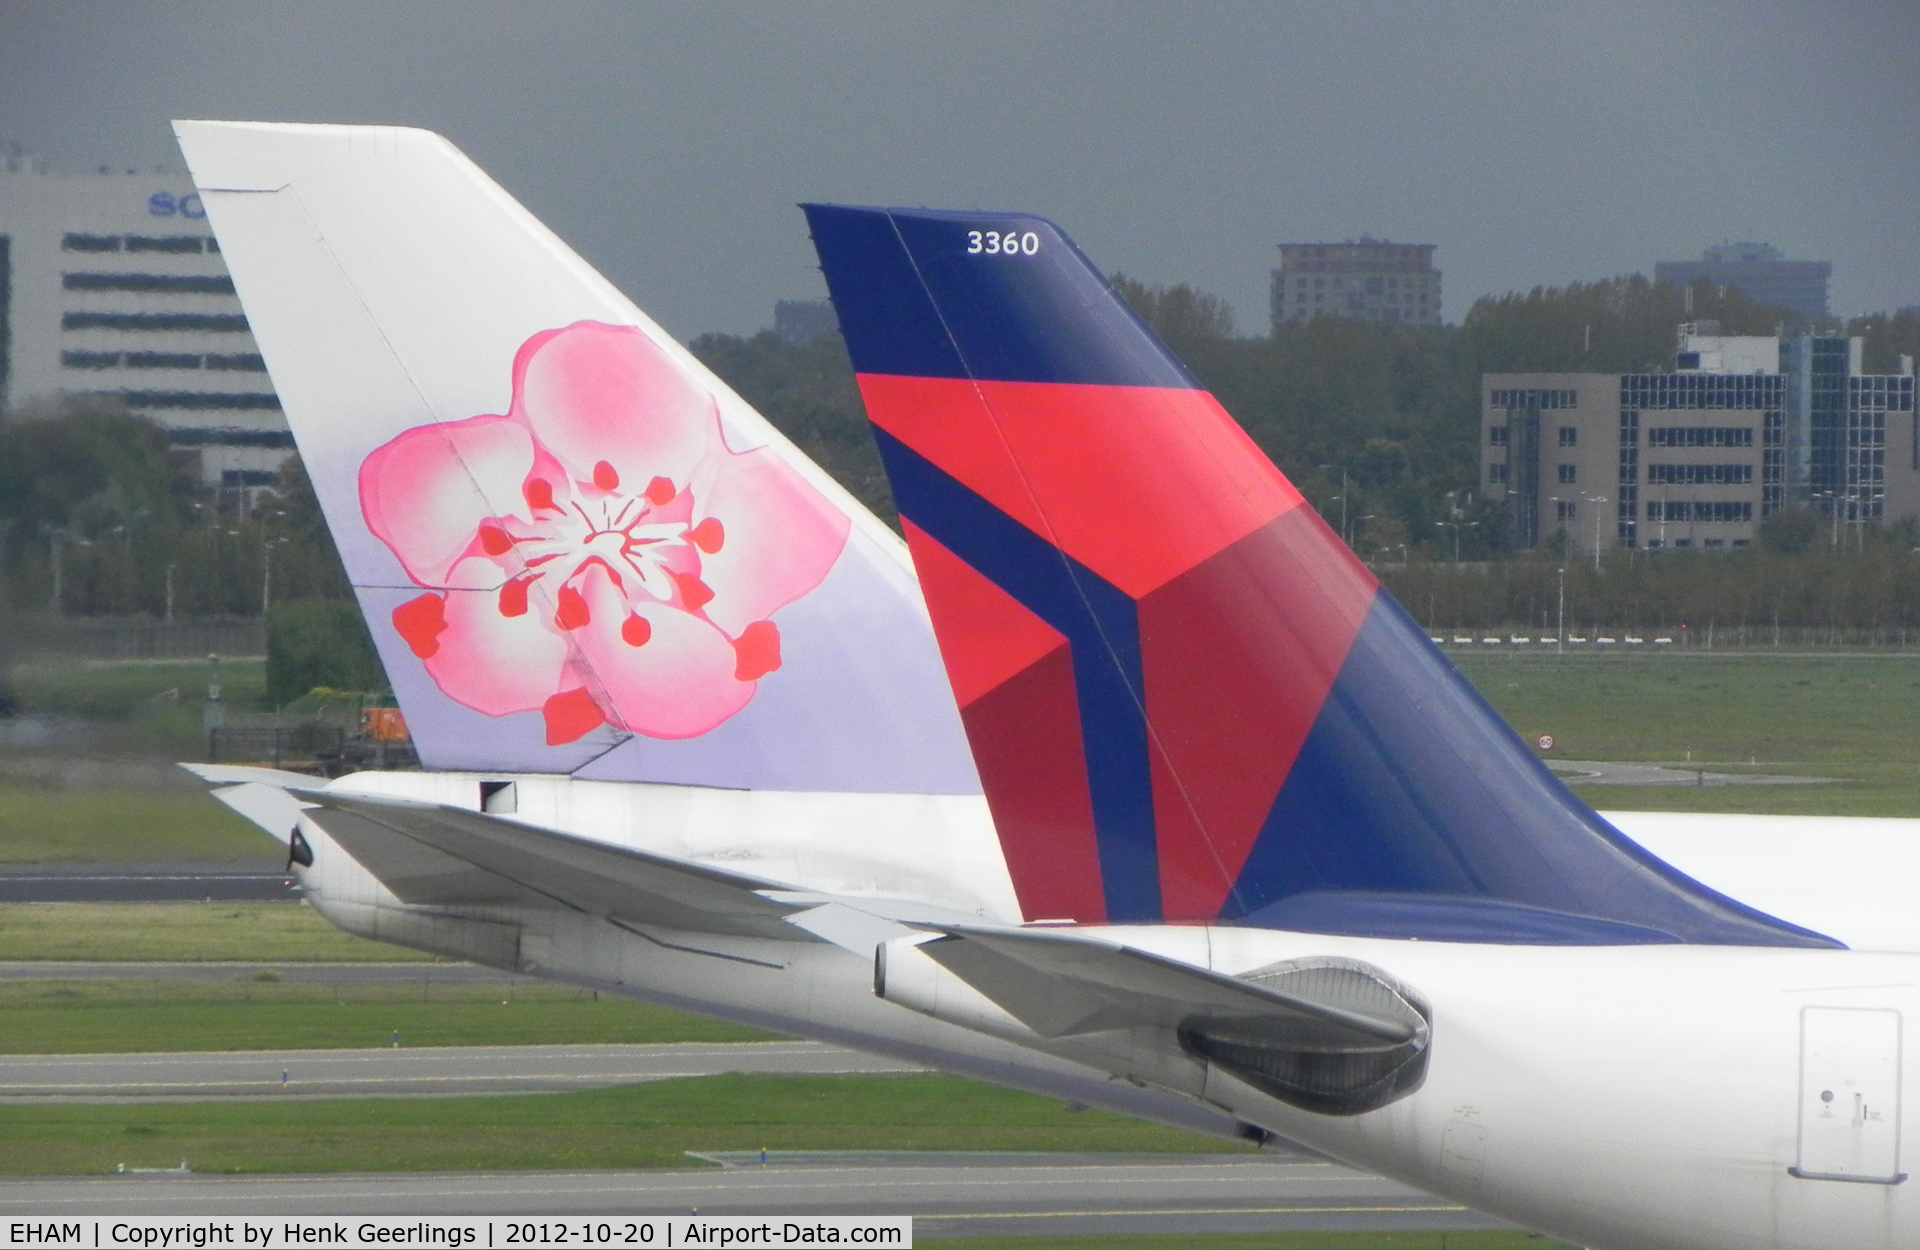 Amsterdam Schiphol Airport, Haarlemmermeer, near Amsterdam Netherlands (EHAM) - Tail from China Airlines B747 , B-18201 and Delta